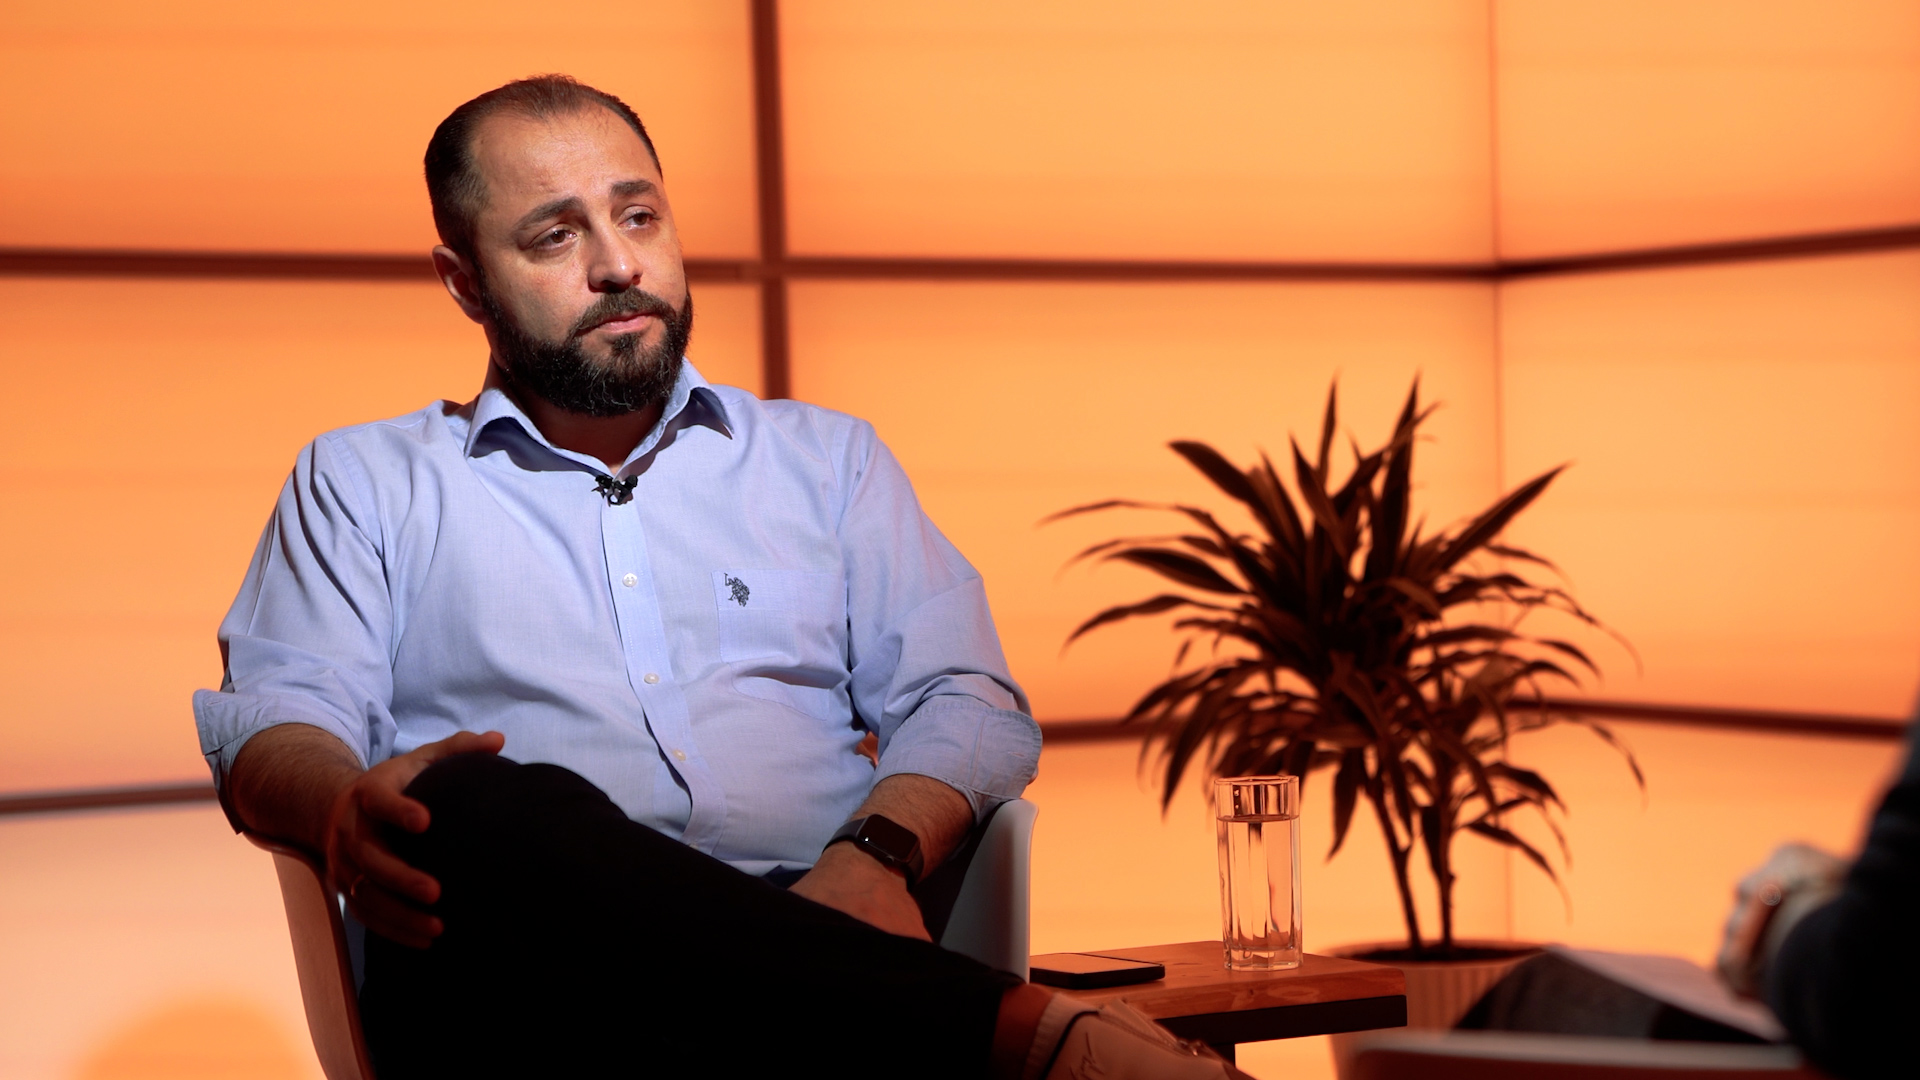 “An educated society is the future for Armenia”, Suren Aloyan